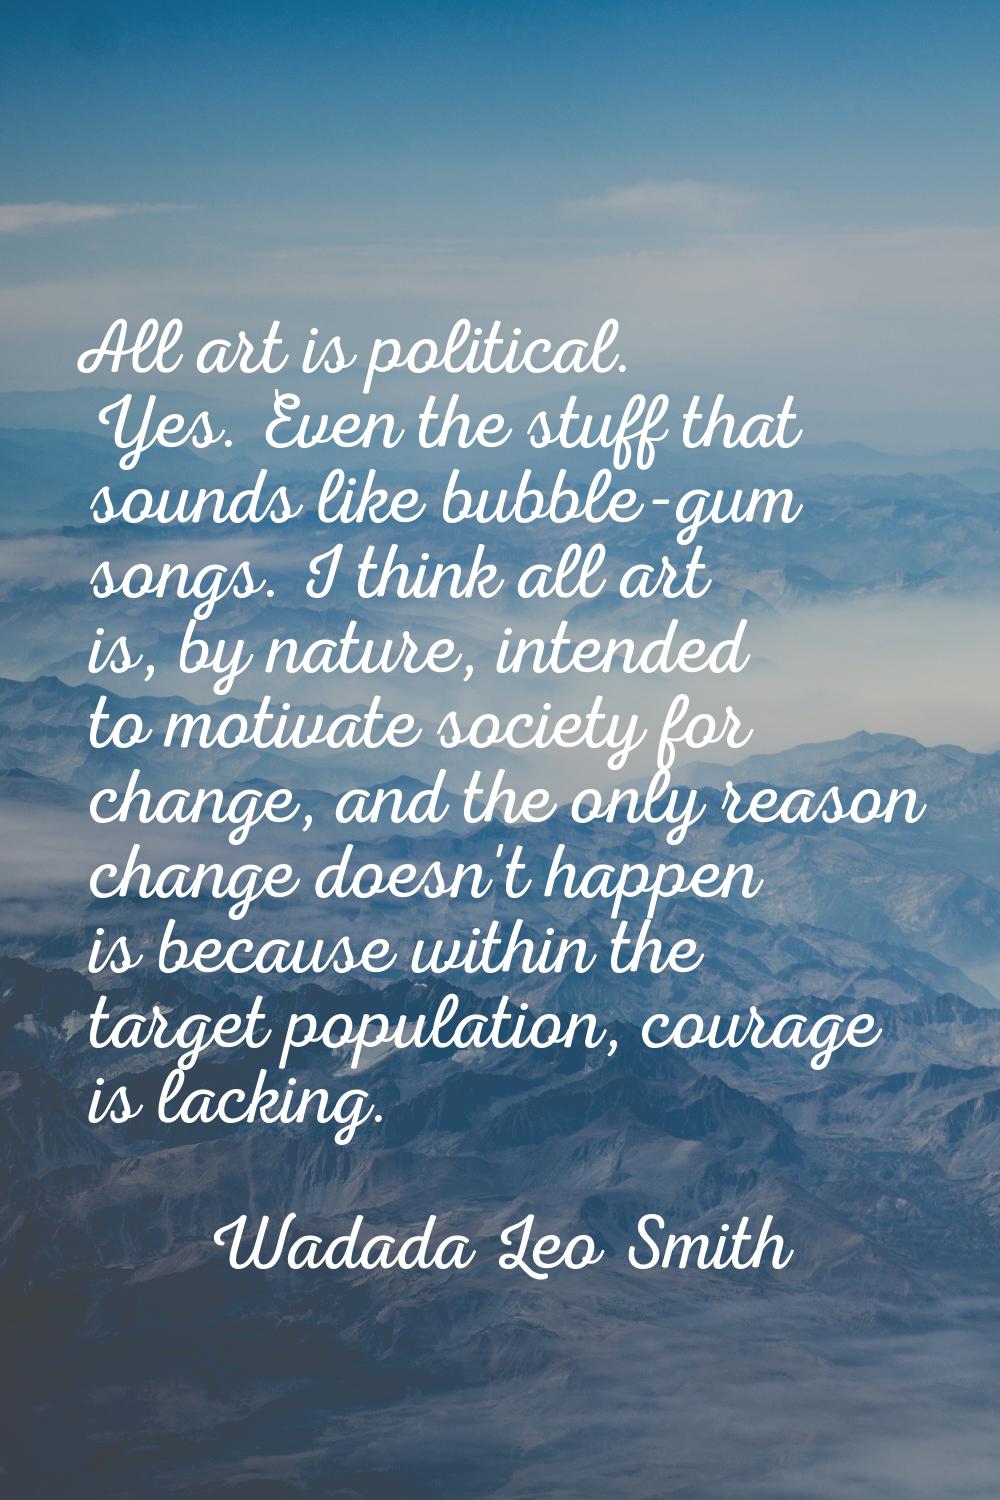 All art is political. Yes. Even the stuff that sounds like bubble-gum songs. I think all art is, by